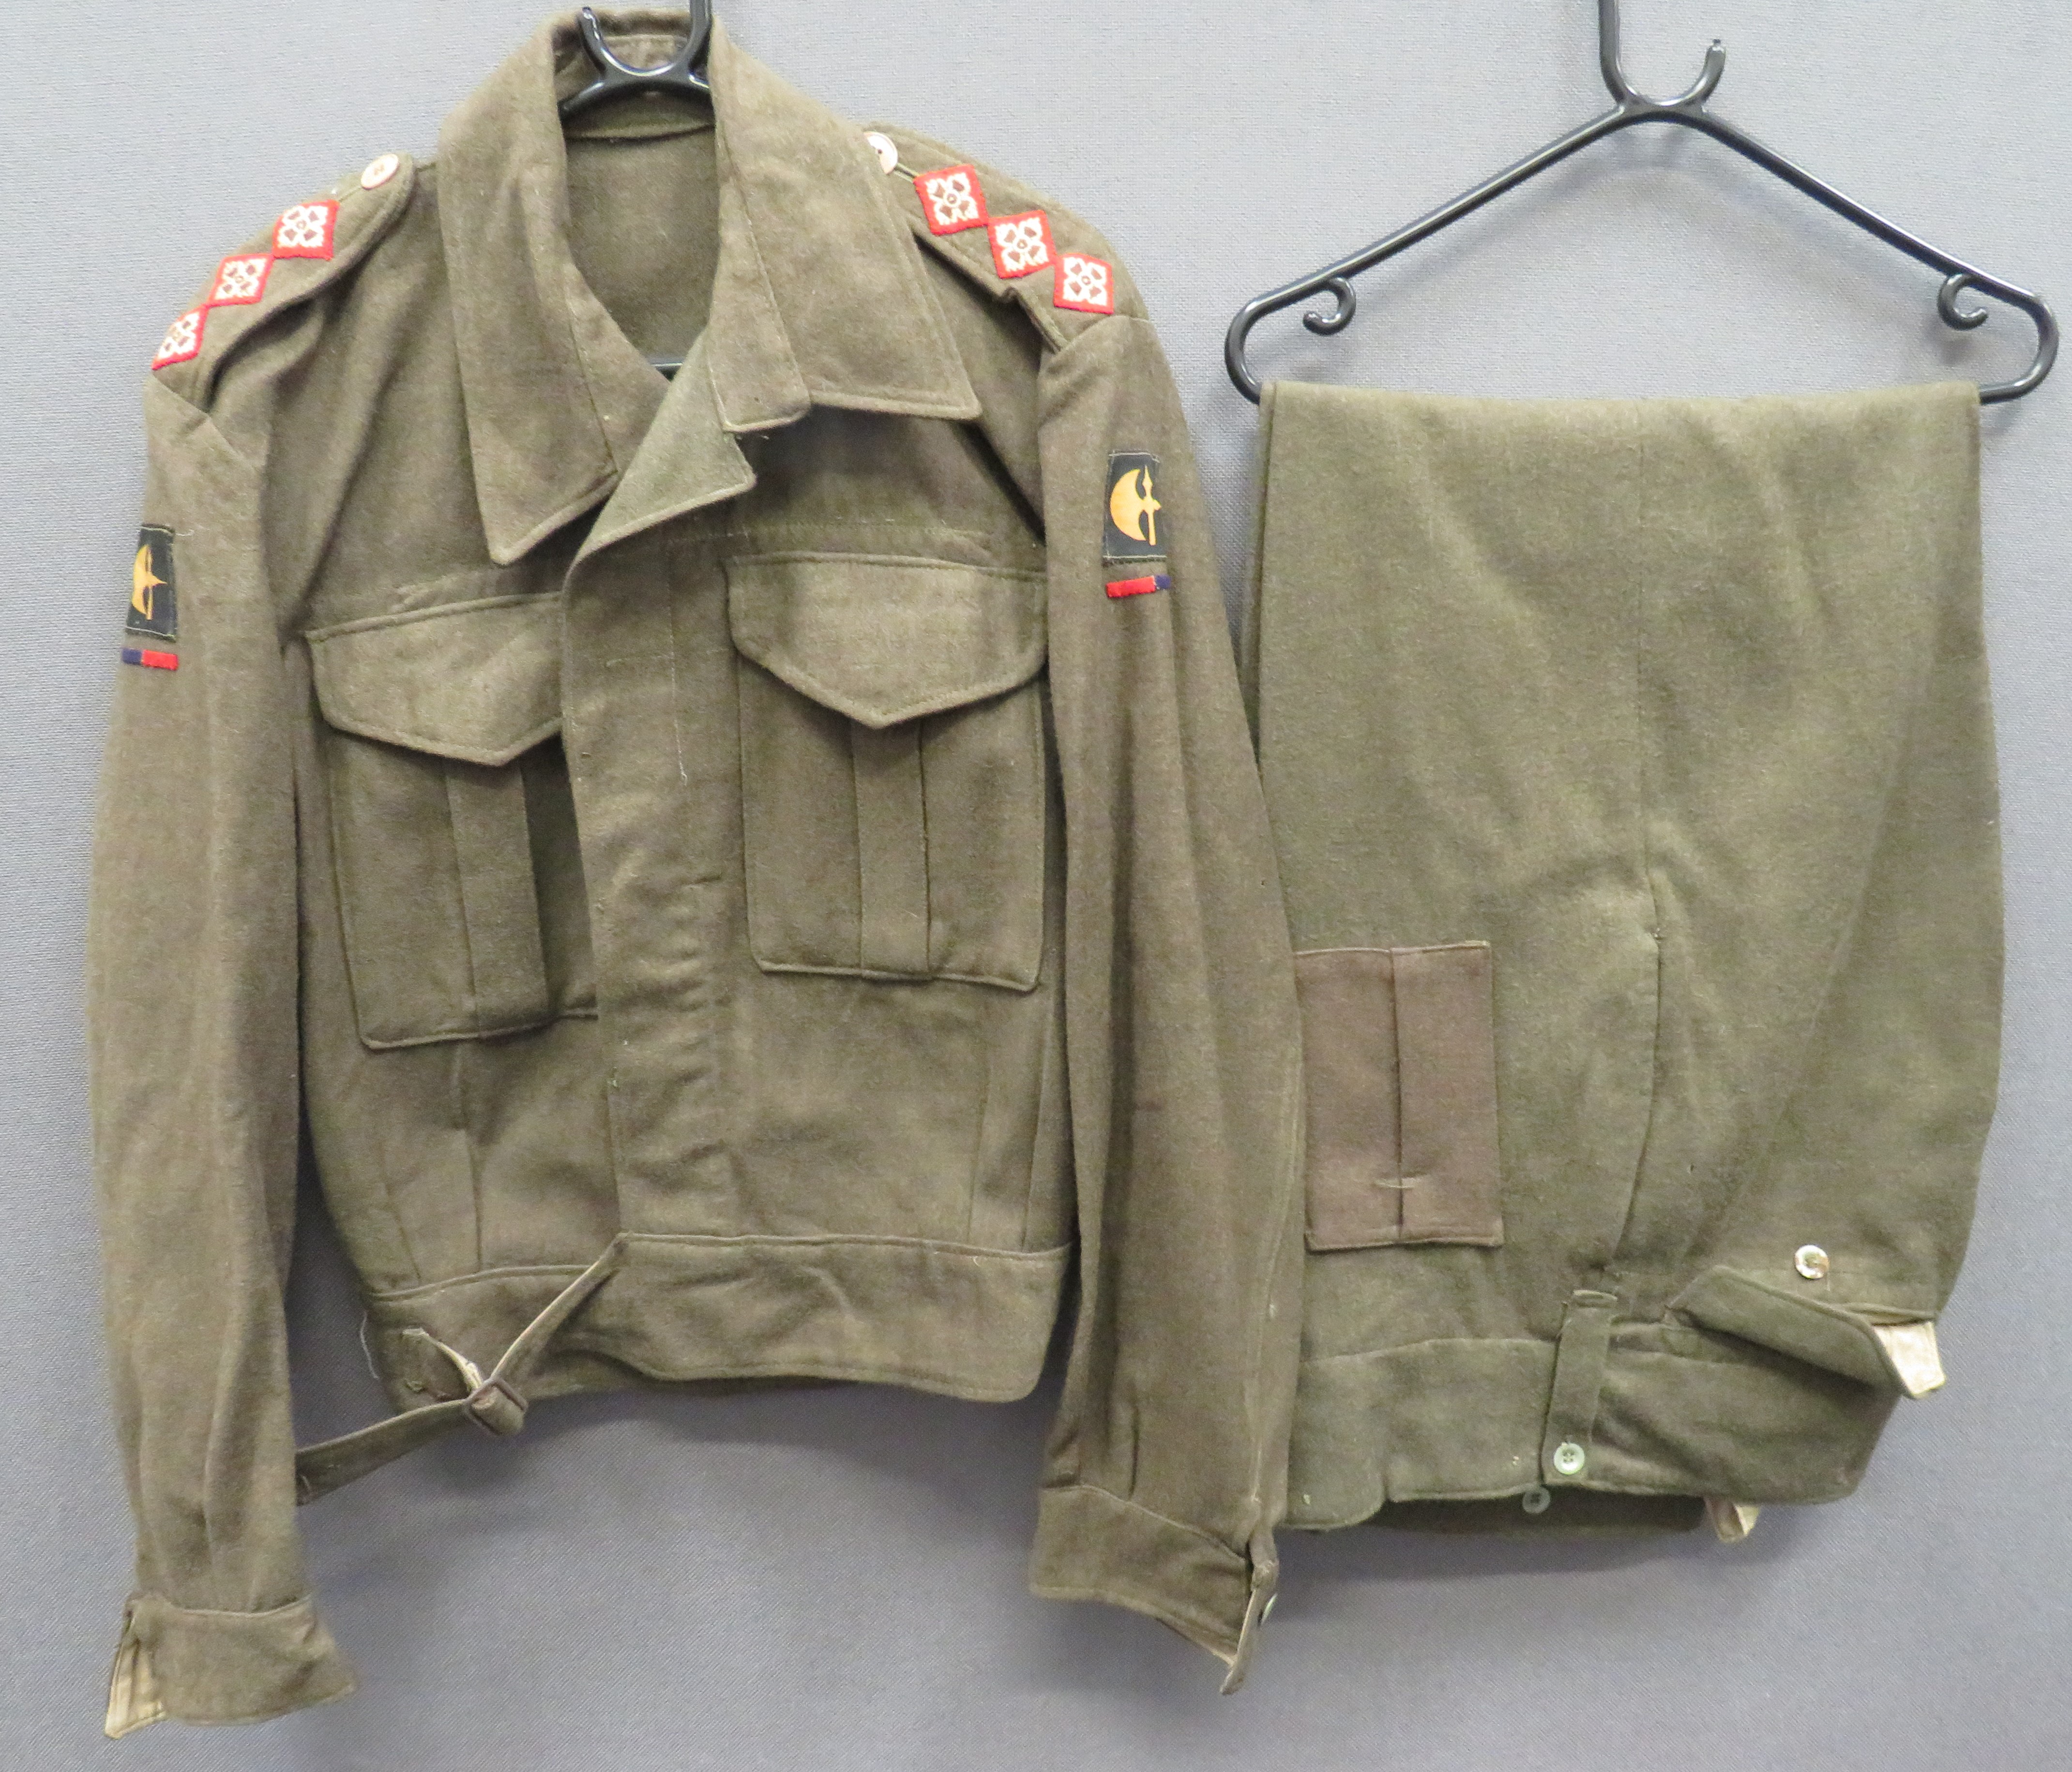 WW2 Australian Made Battledress Jacket And Trousers 78th Inf Div consisting khaki green, open